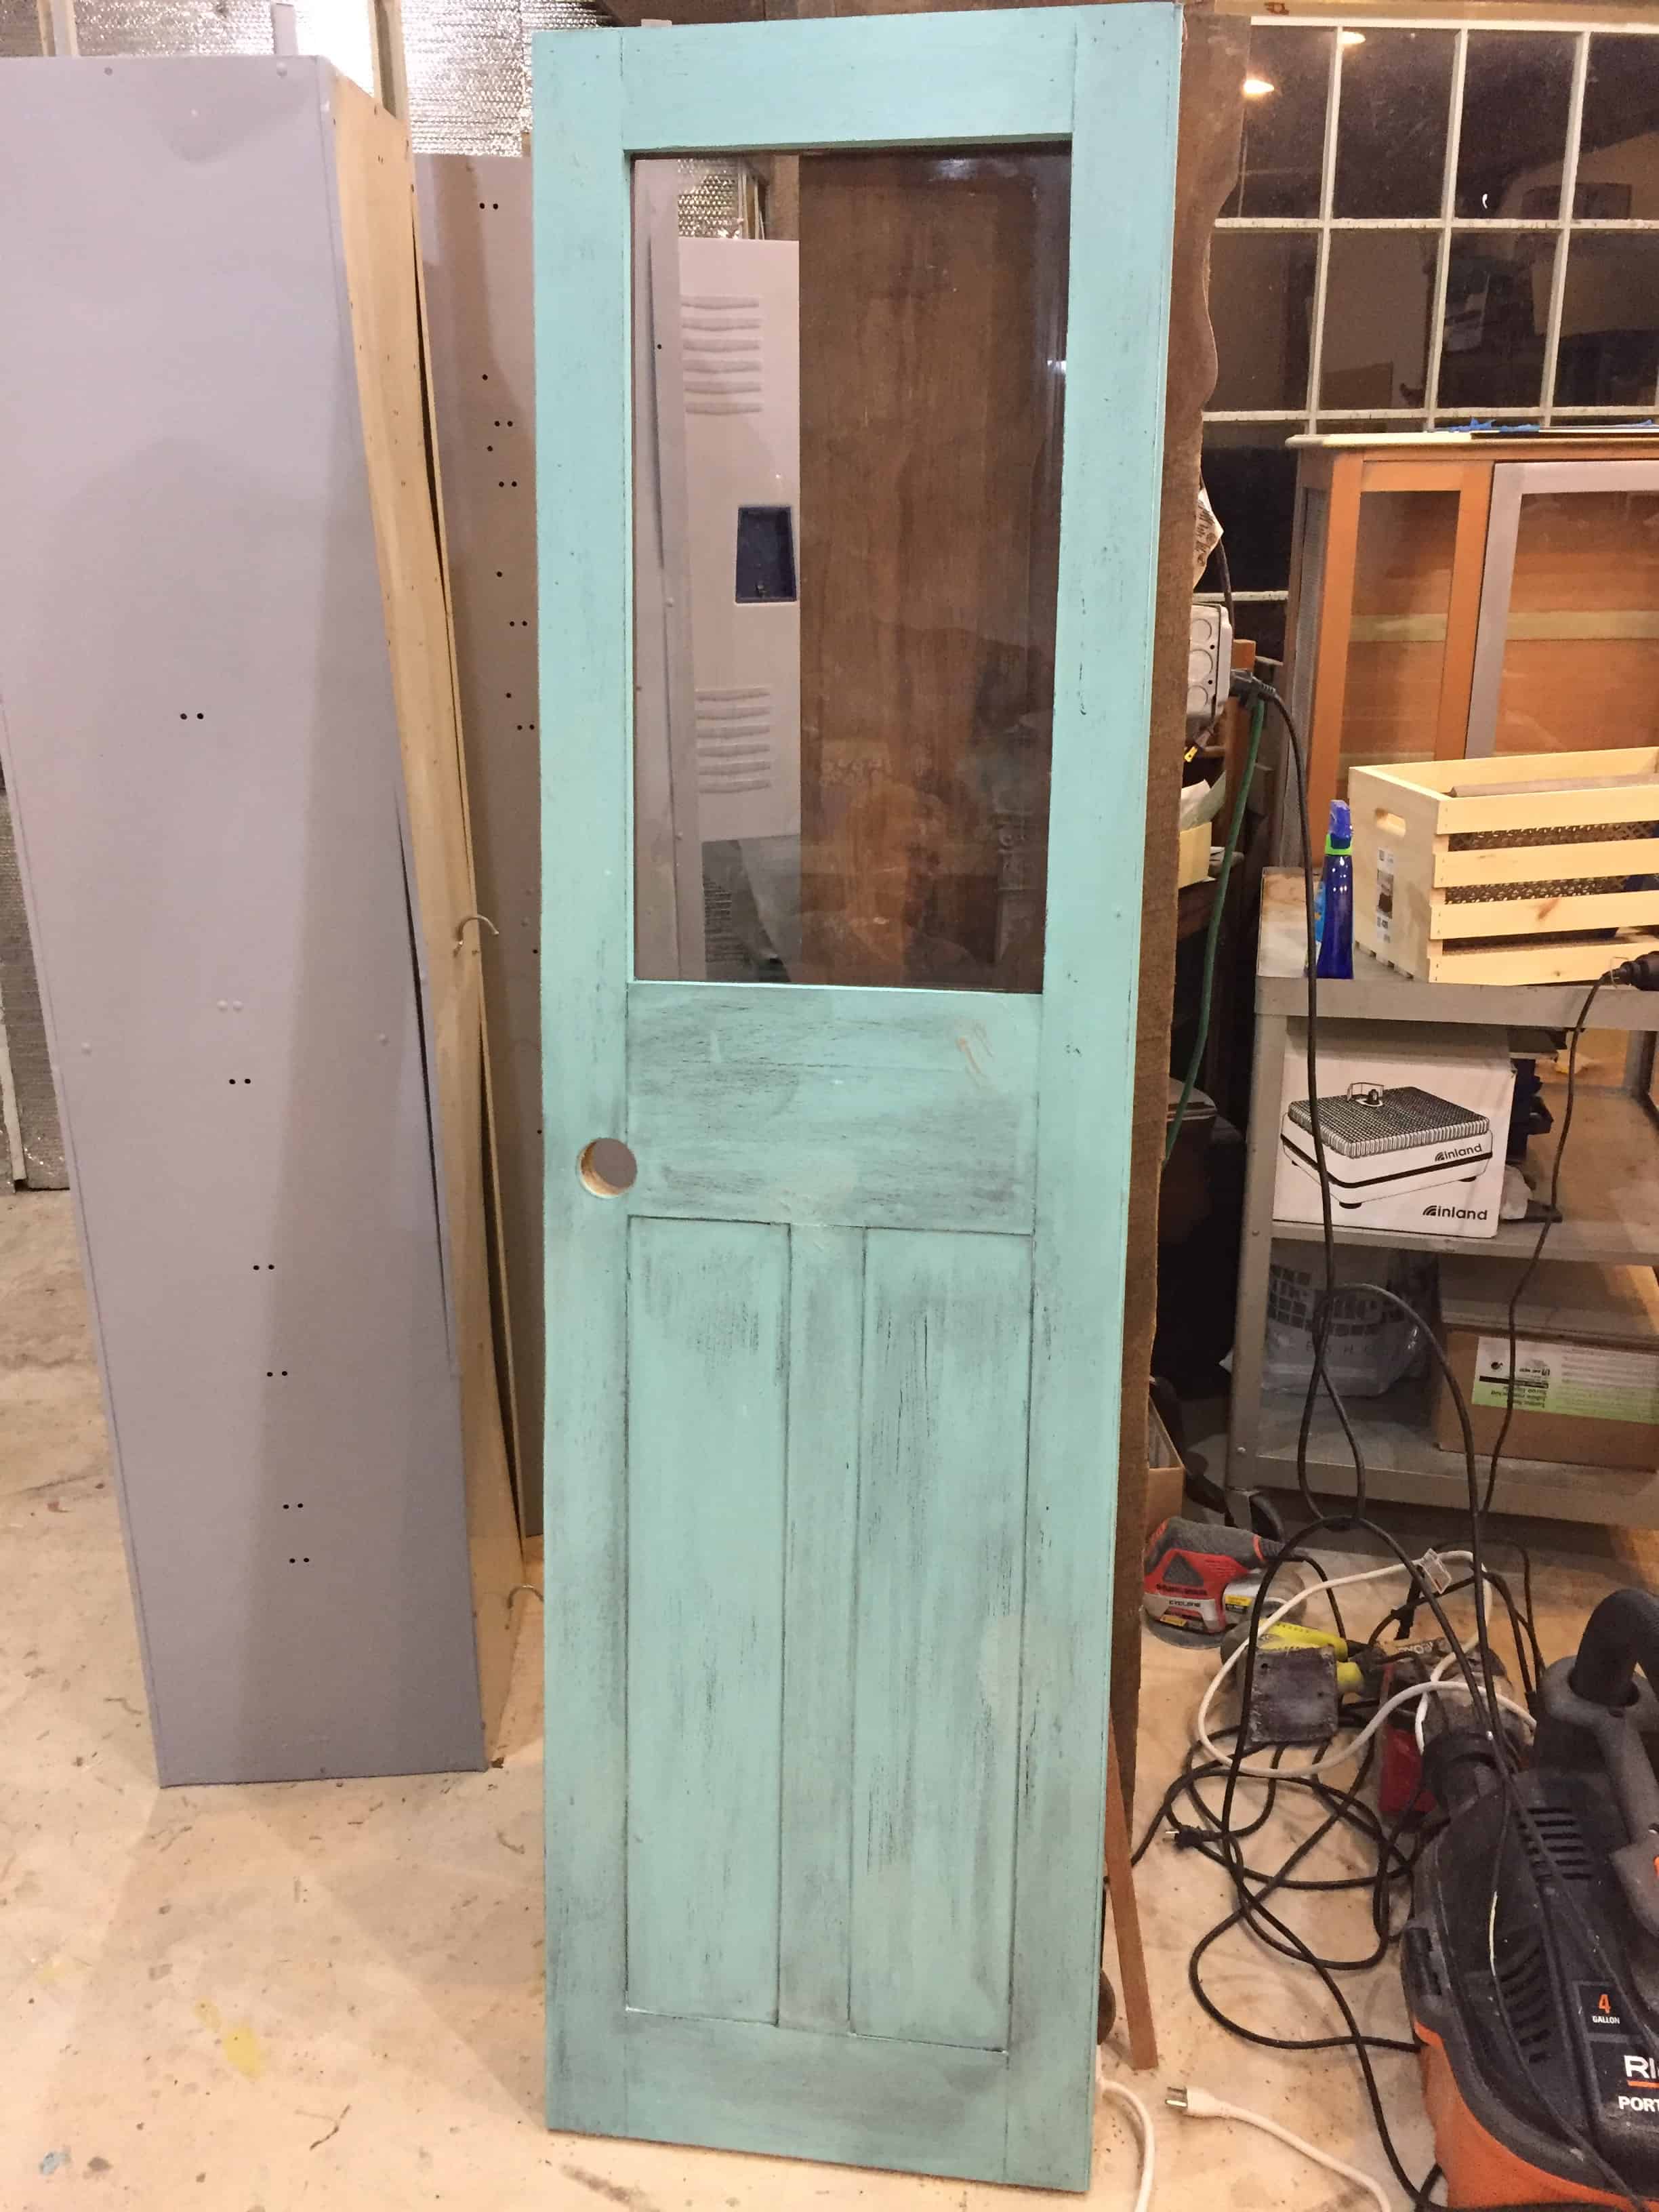 Saved by Scottie rv remodel office door redo after paint and glassJPG